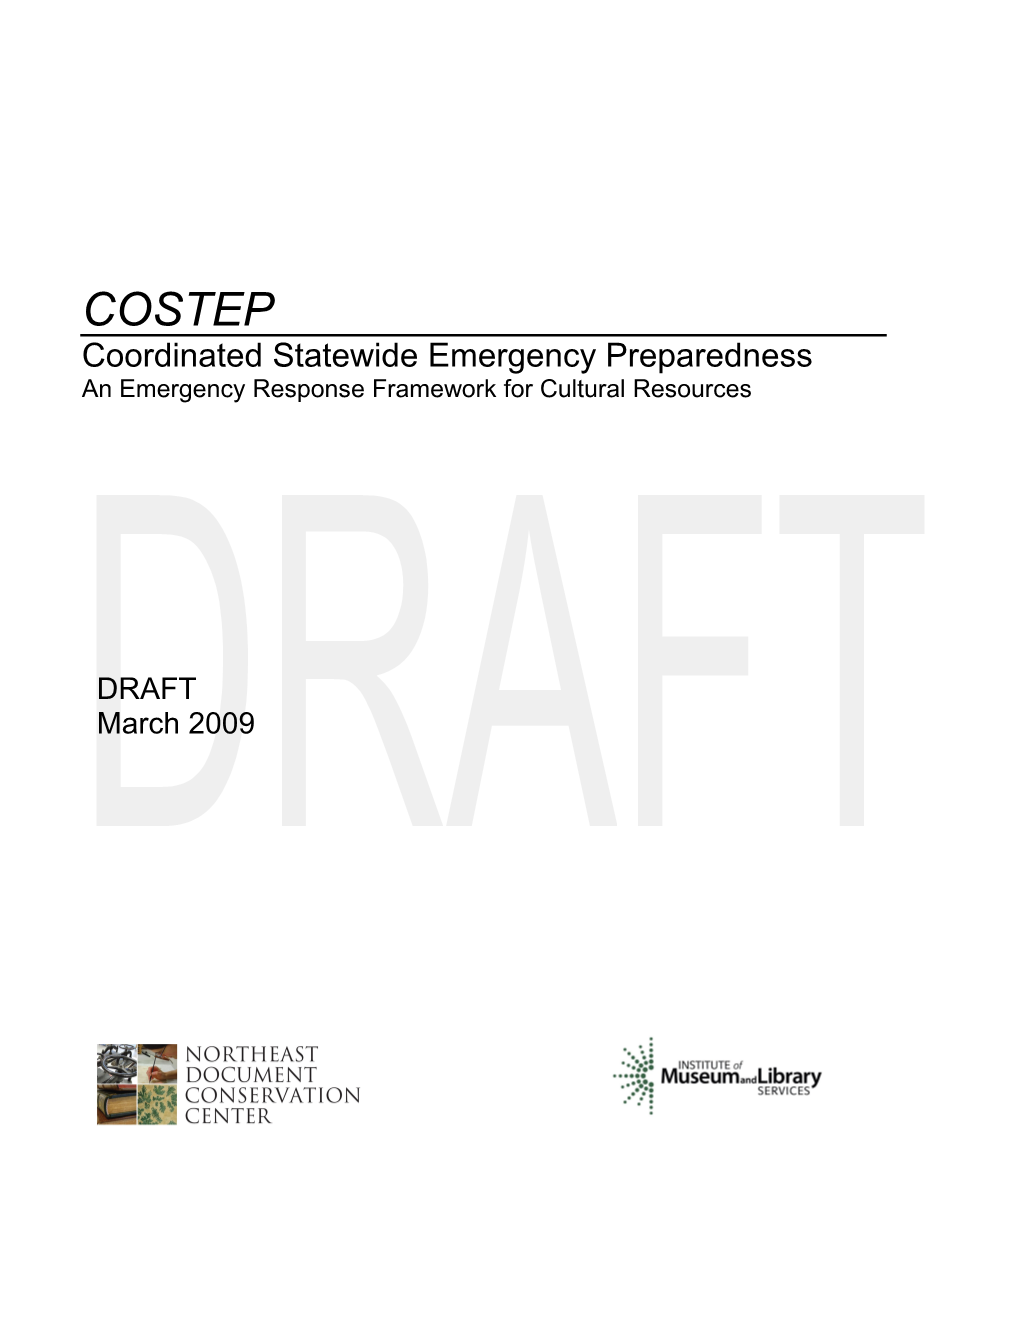 An Emergency Response Framework for Cultural Resources